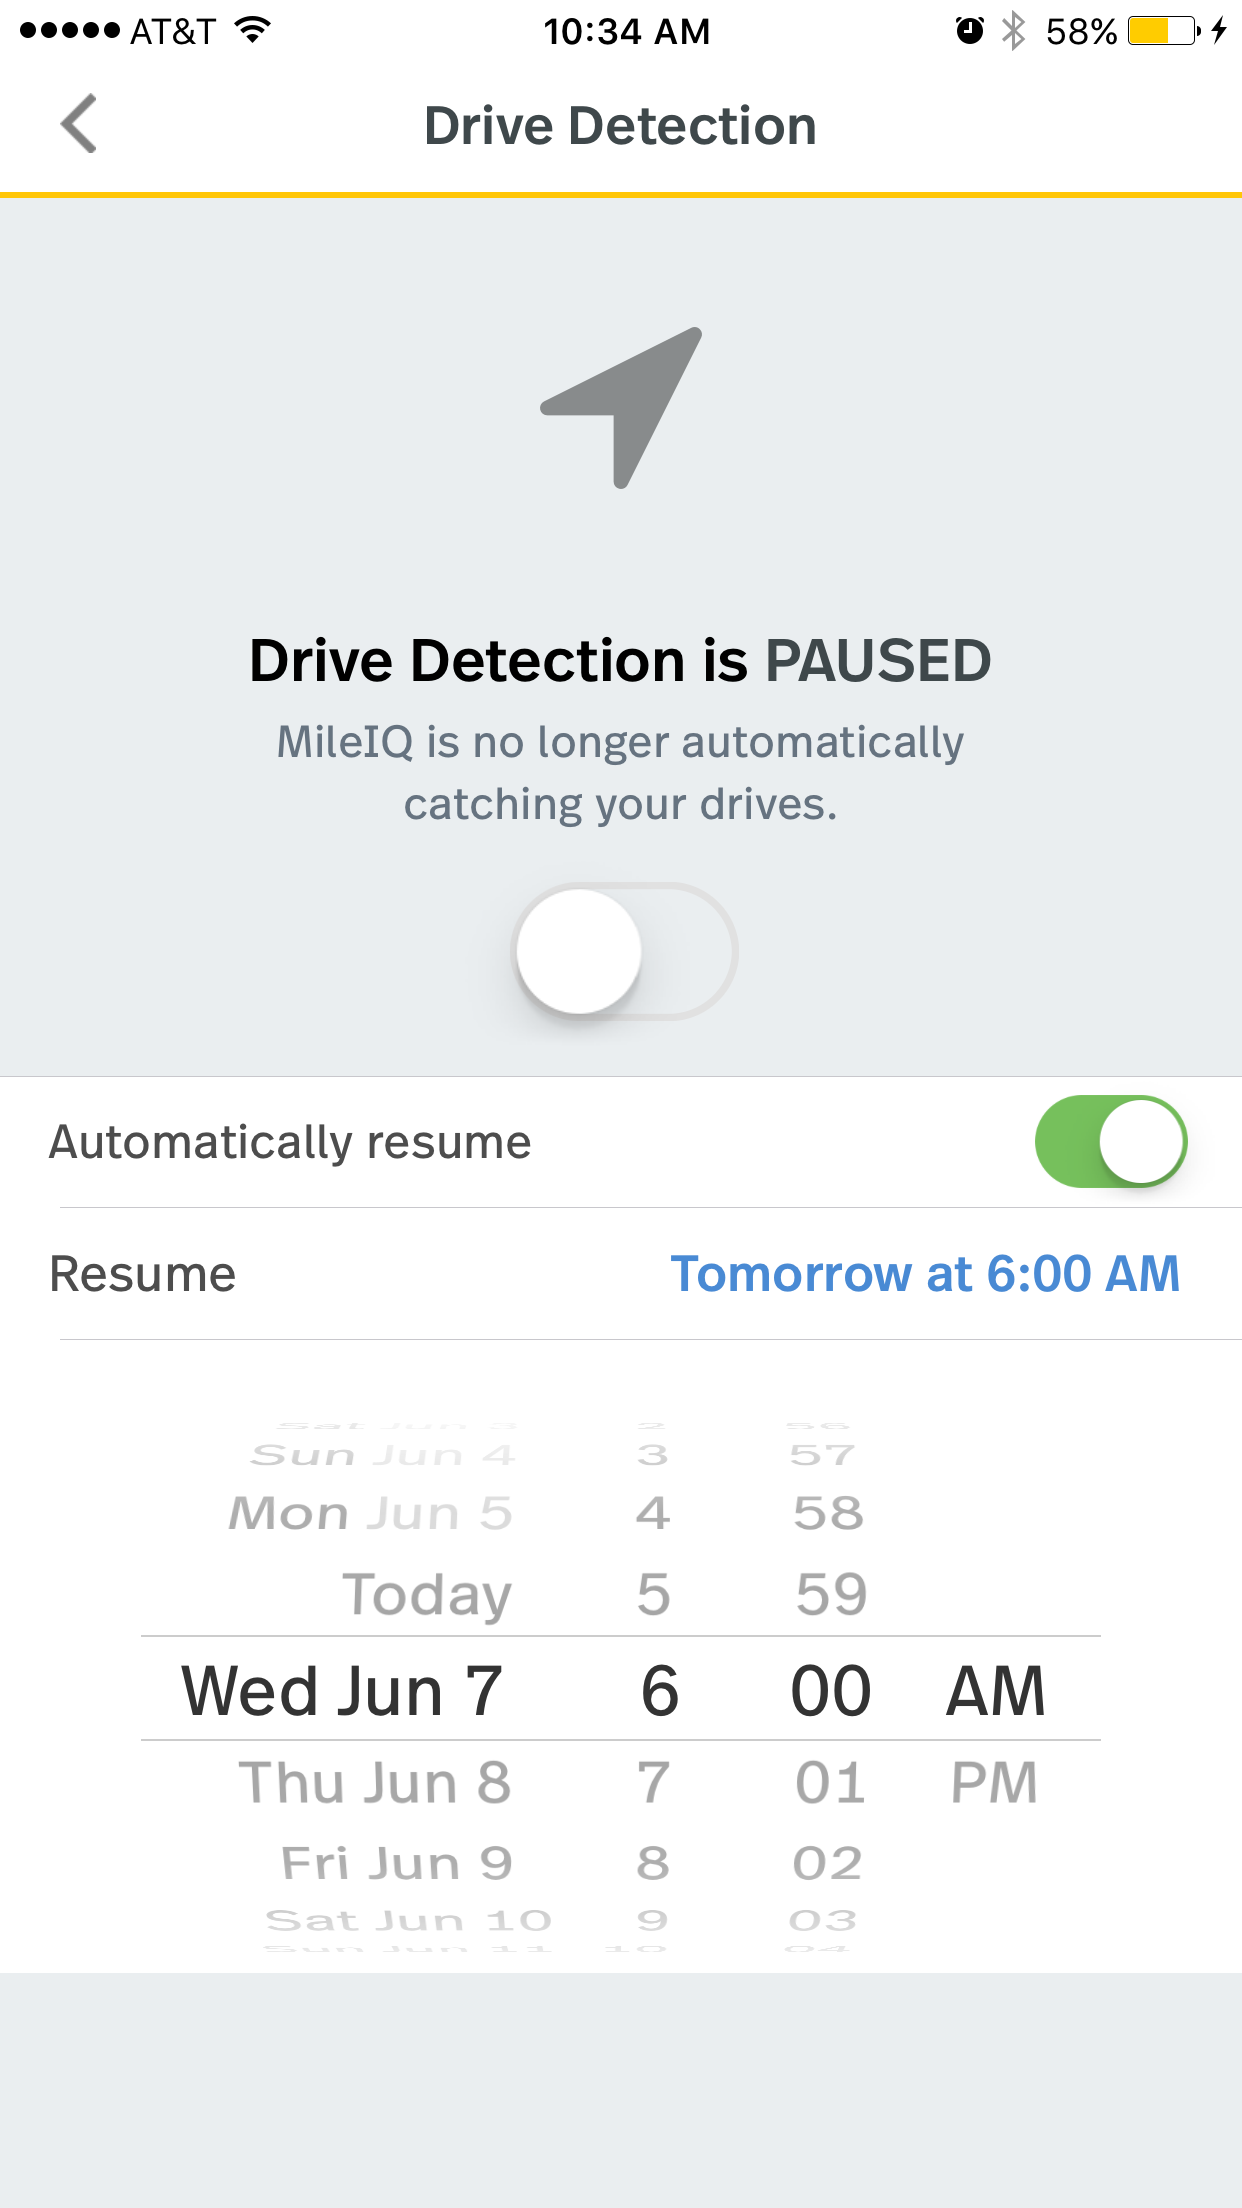 This image shows the drive detection page on the mobile app, showing the automatically resume toggle switched to green and a calendar selection to set a date to auto resume drive detection.